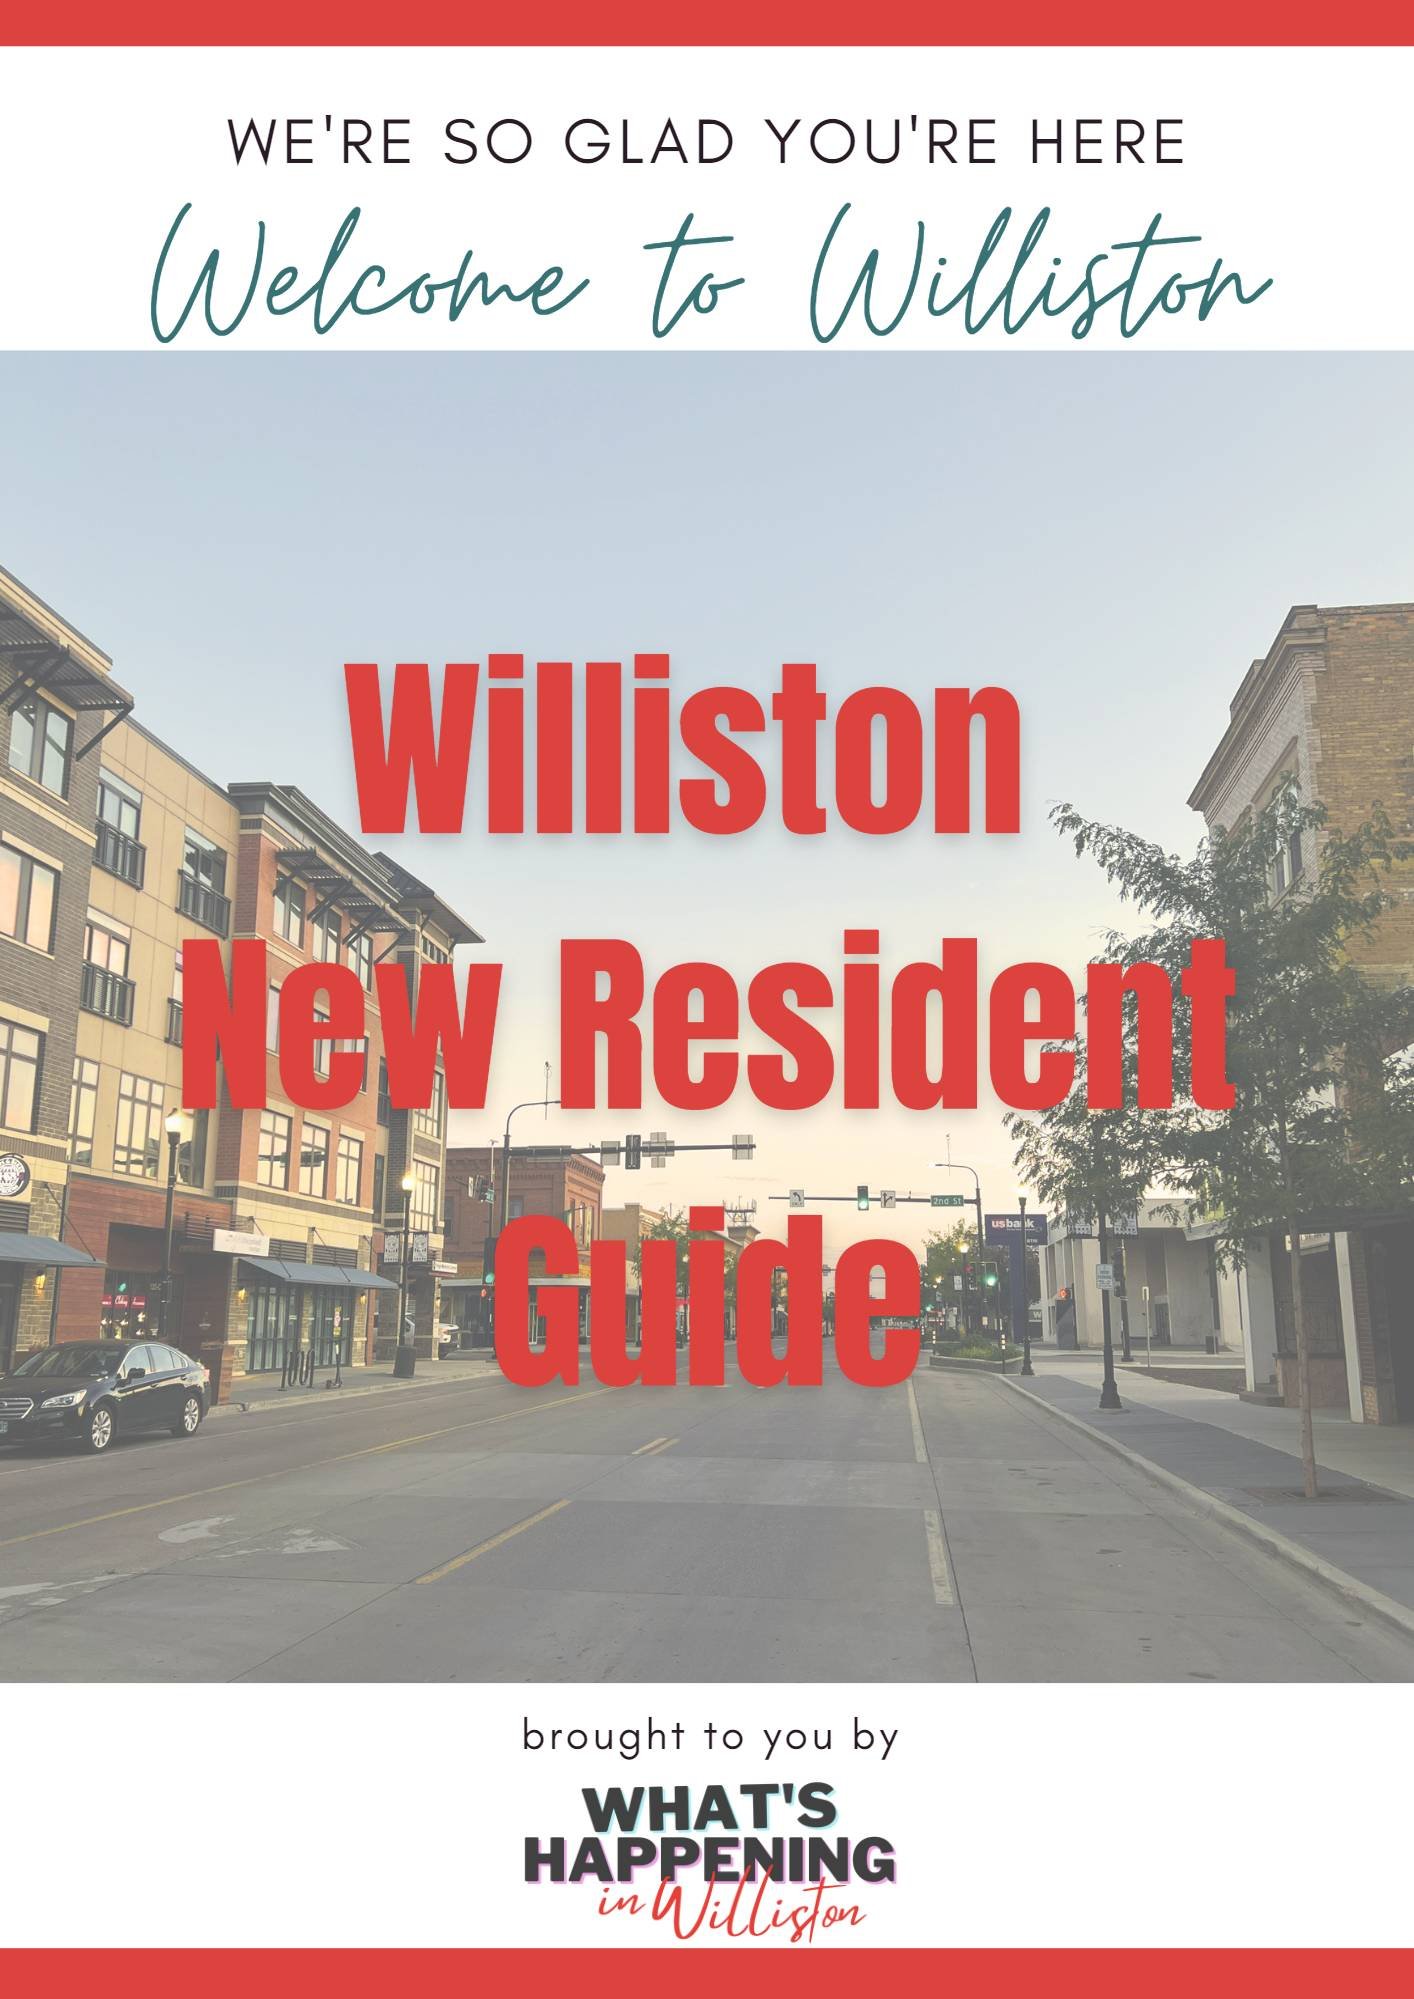 00 Welcome to Williston Guide.jpg